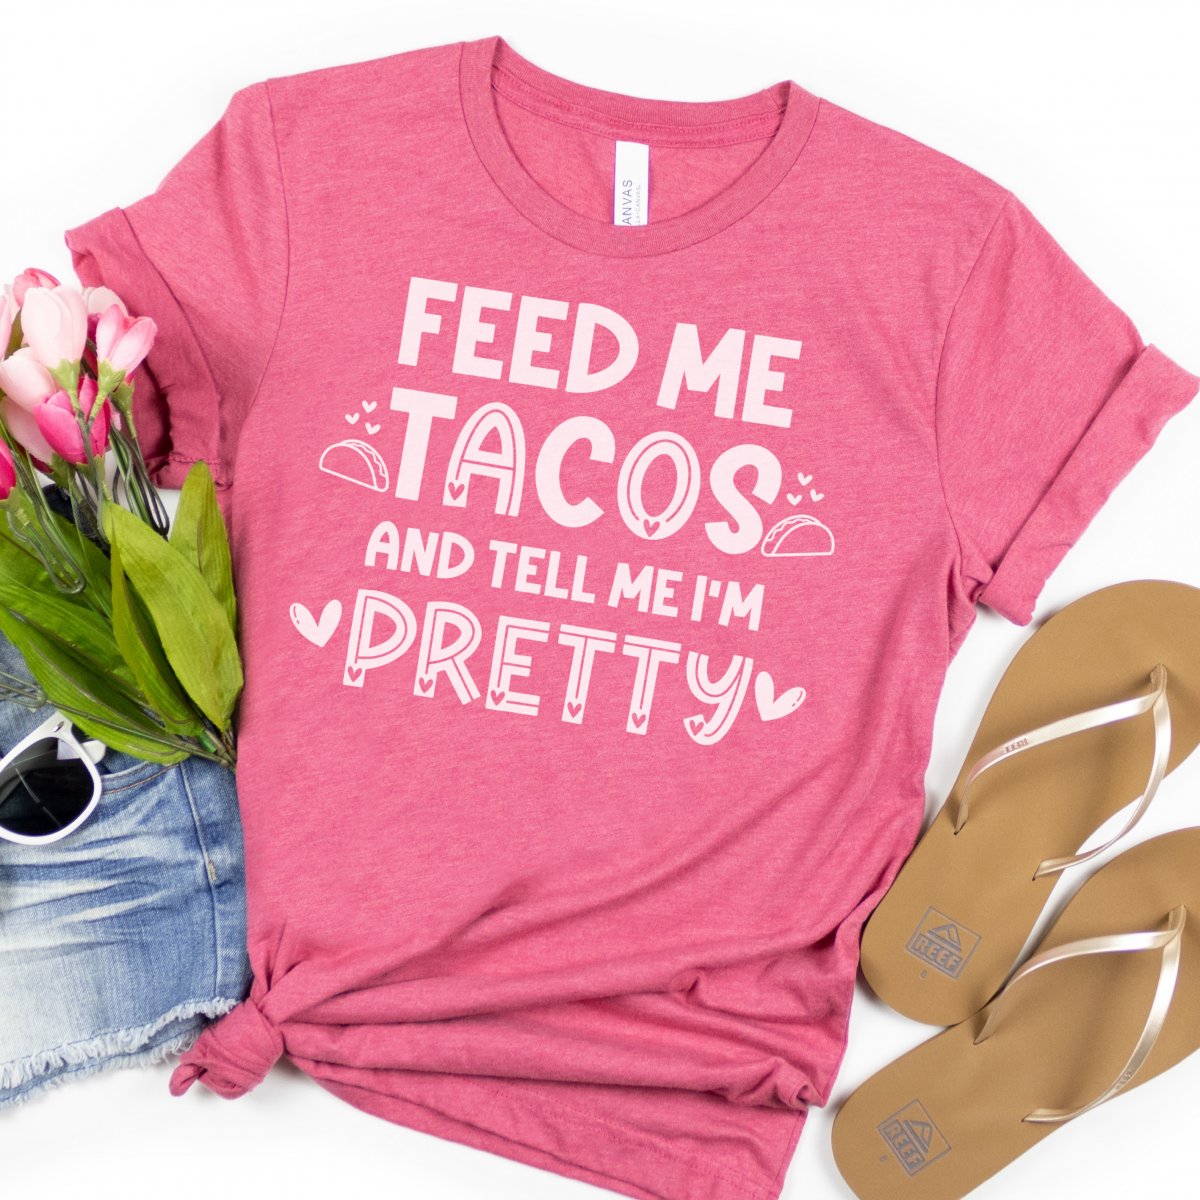 If you LOVE tacos (like I do) than you have definitely come to the right place! Get ready for some tasty Cricut crafting fun with these 14 free Taco SVG files including Feed Me Tacos And Tell Me I'm Pretty! Because isn't that what every taco loving gal wants? Easy to use for DIY t-shirts, tank tops, mugs, beach bags and more! So much fun for making handmade gifts for taco lovers!